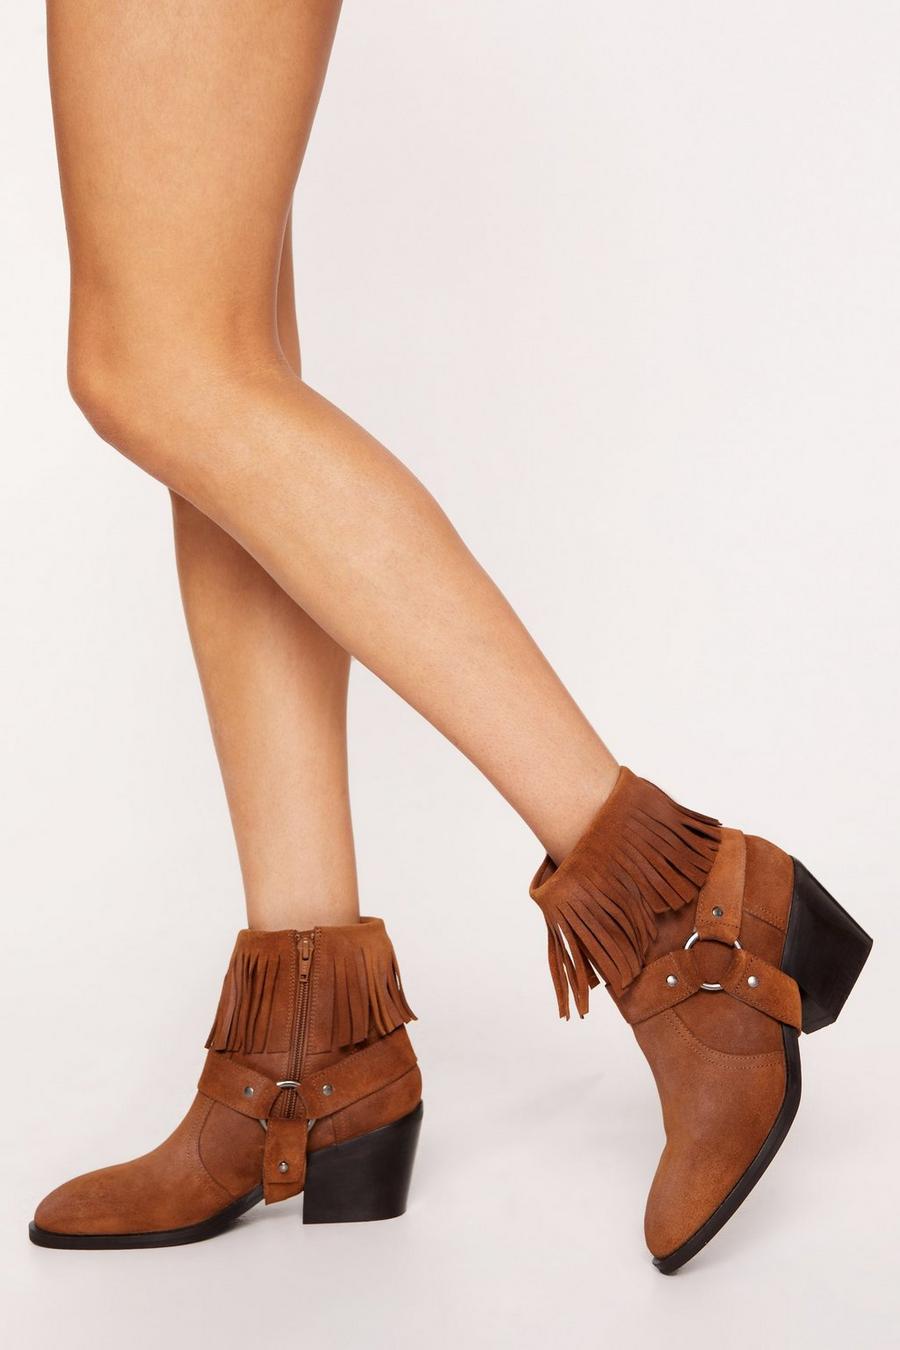 Tan Tarnished Suede Fringe Harness Ankle Cowboy Boots